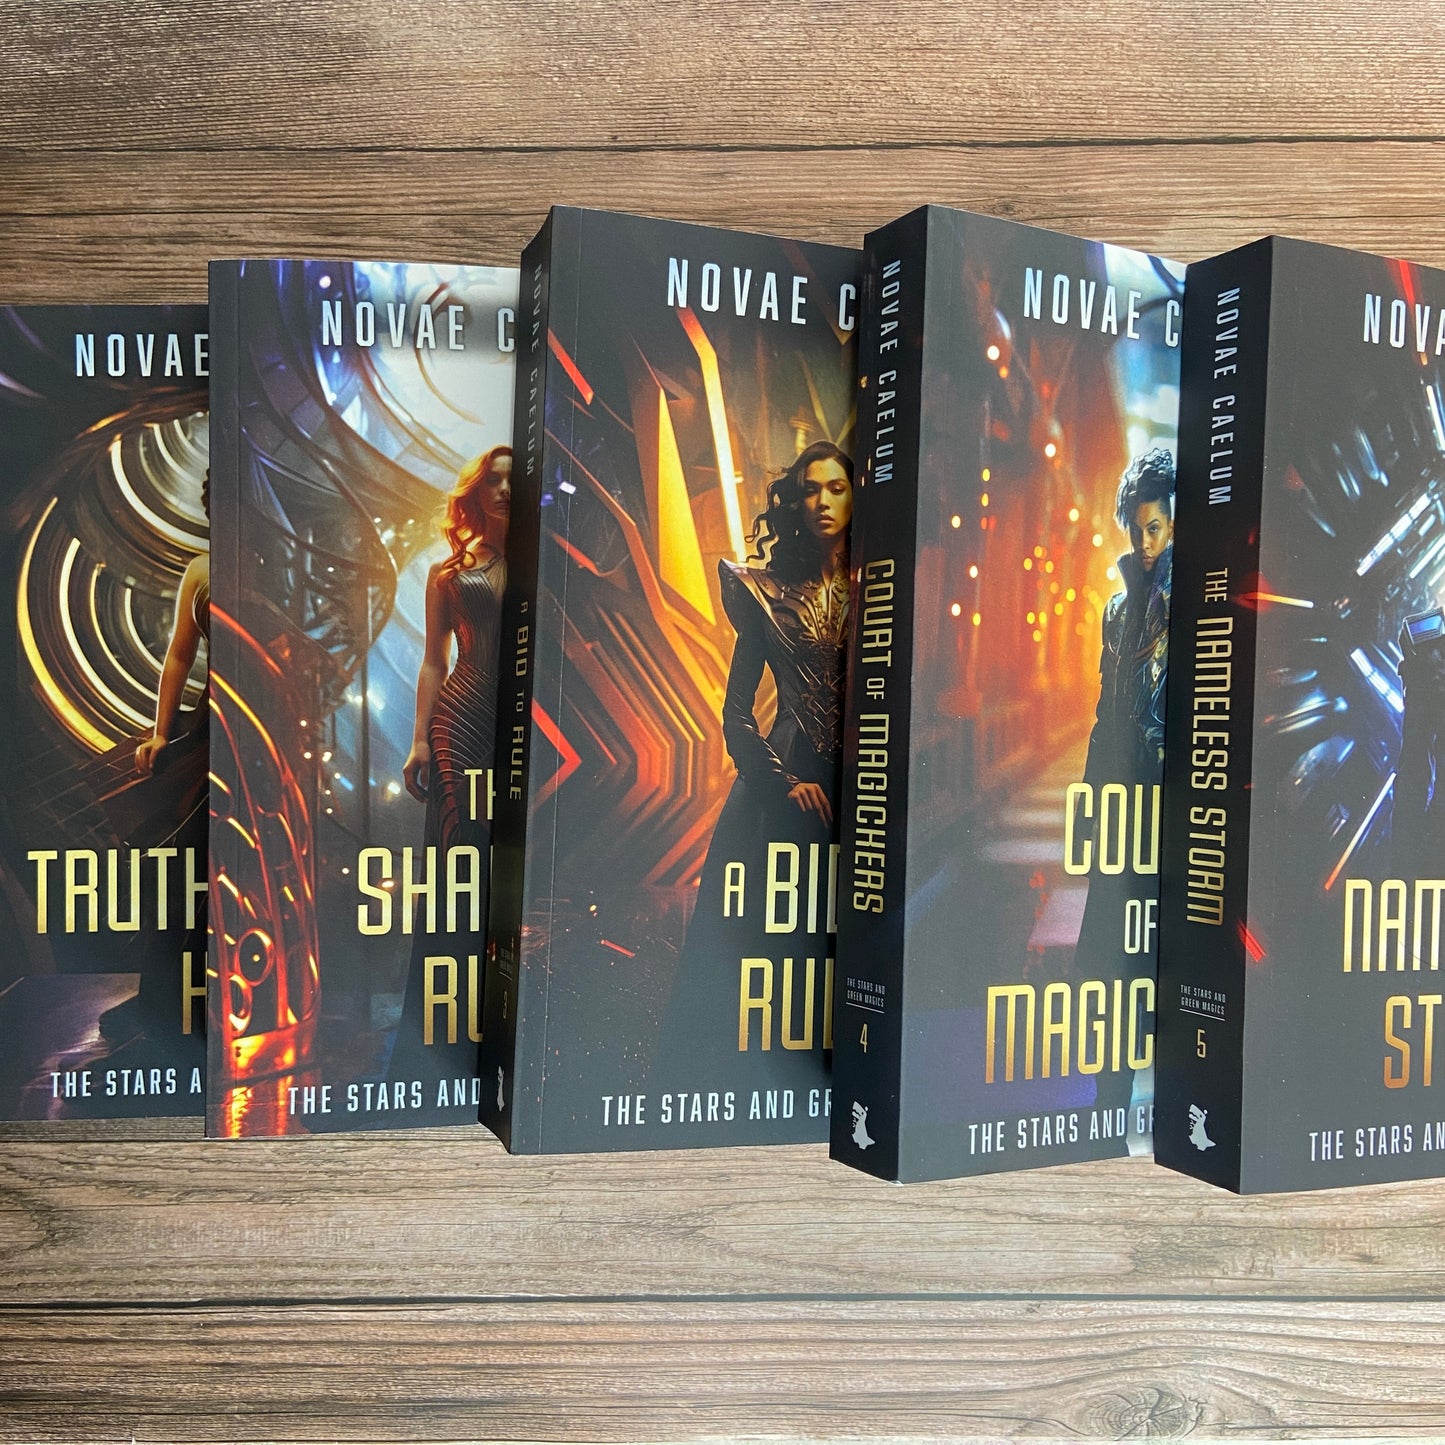 Set of 5 paperbacks (Books 1-5) from "The Stars and Green Magics" series by Novae Caelum arranged in a staggered row. This collection is part of the Paperback Deluxe Swag Bundle.